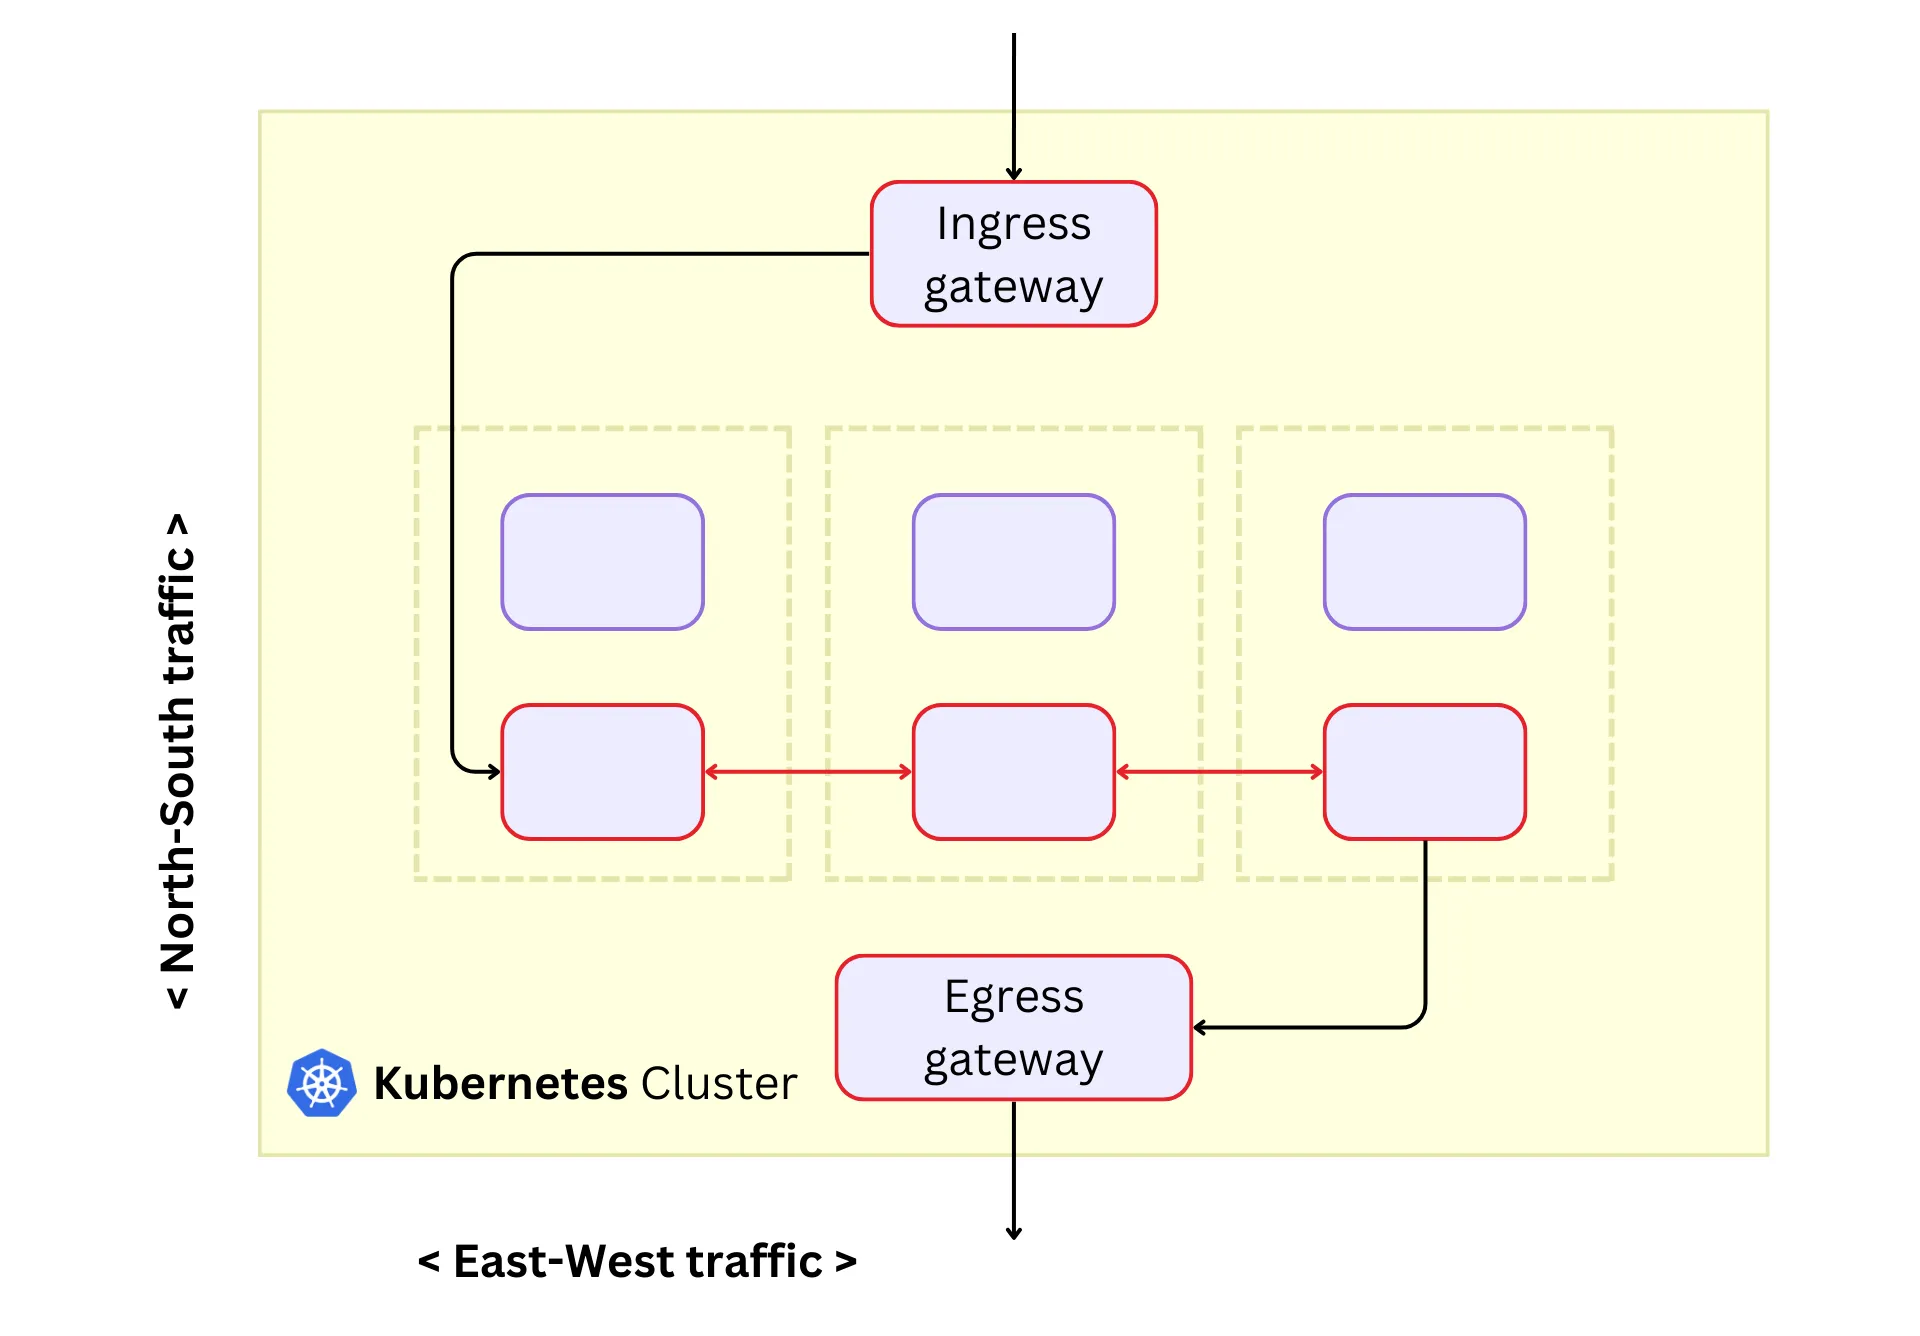 Ingress and egress gateways with a service mesh